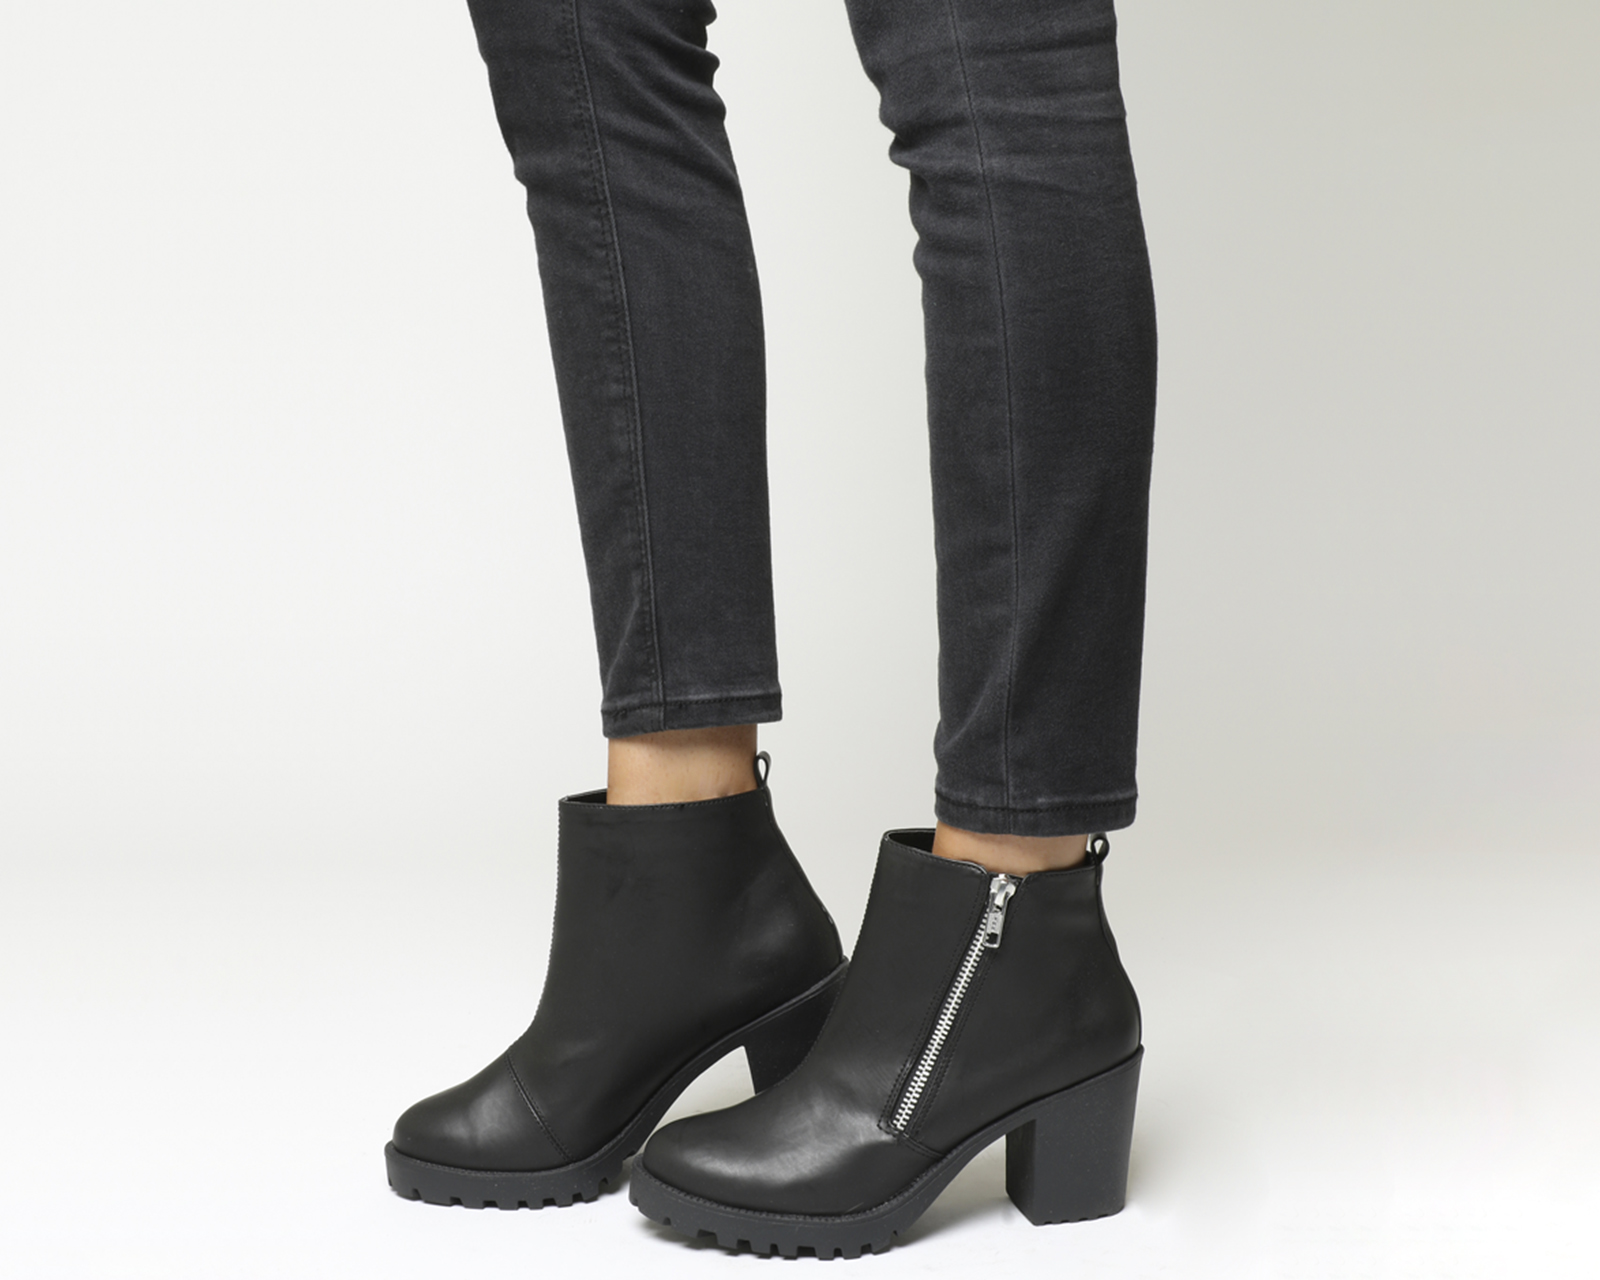 OFFICEFuel Side Zip Chunky bootsBlack